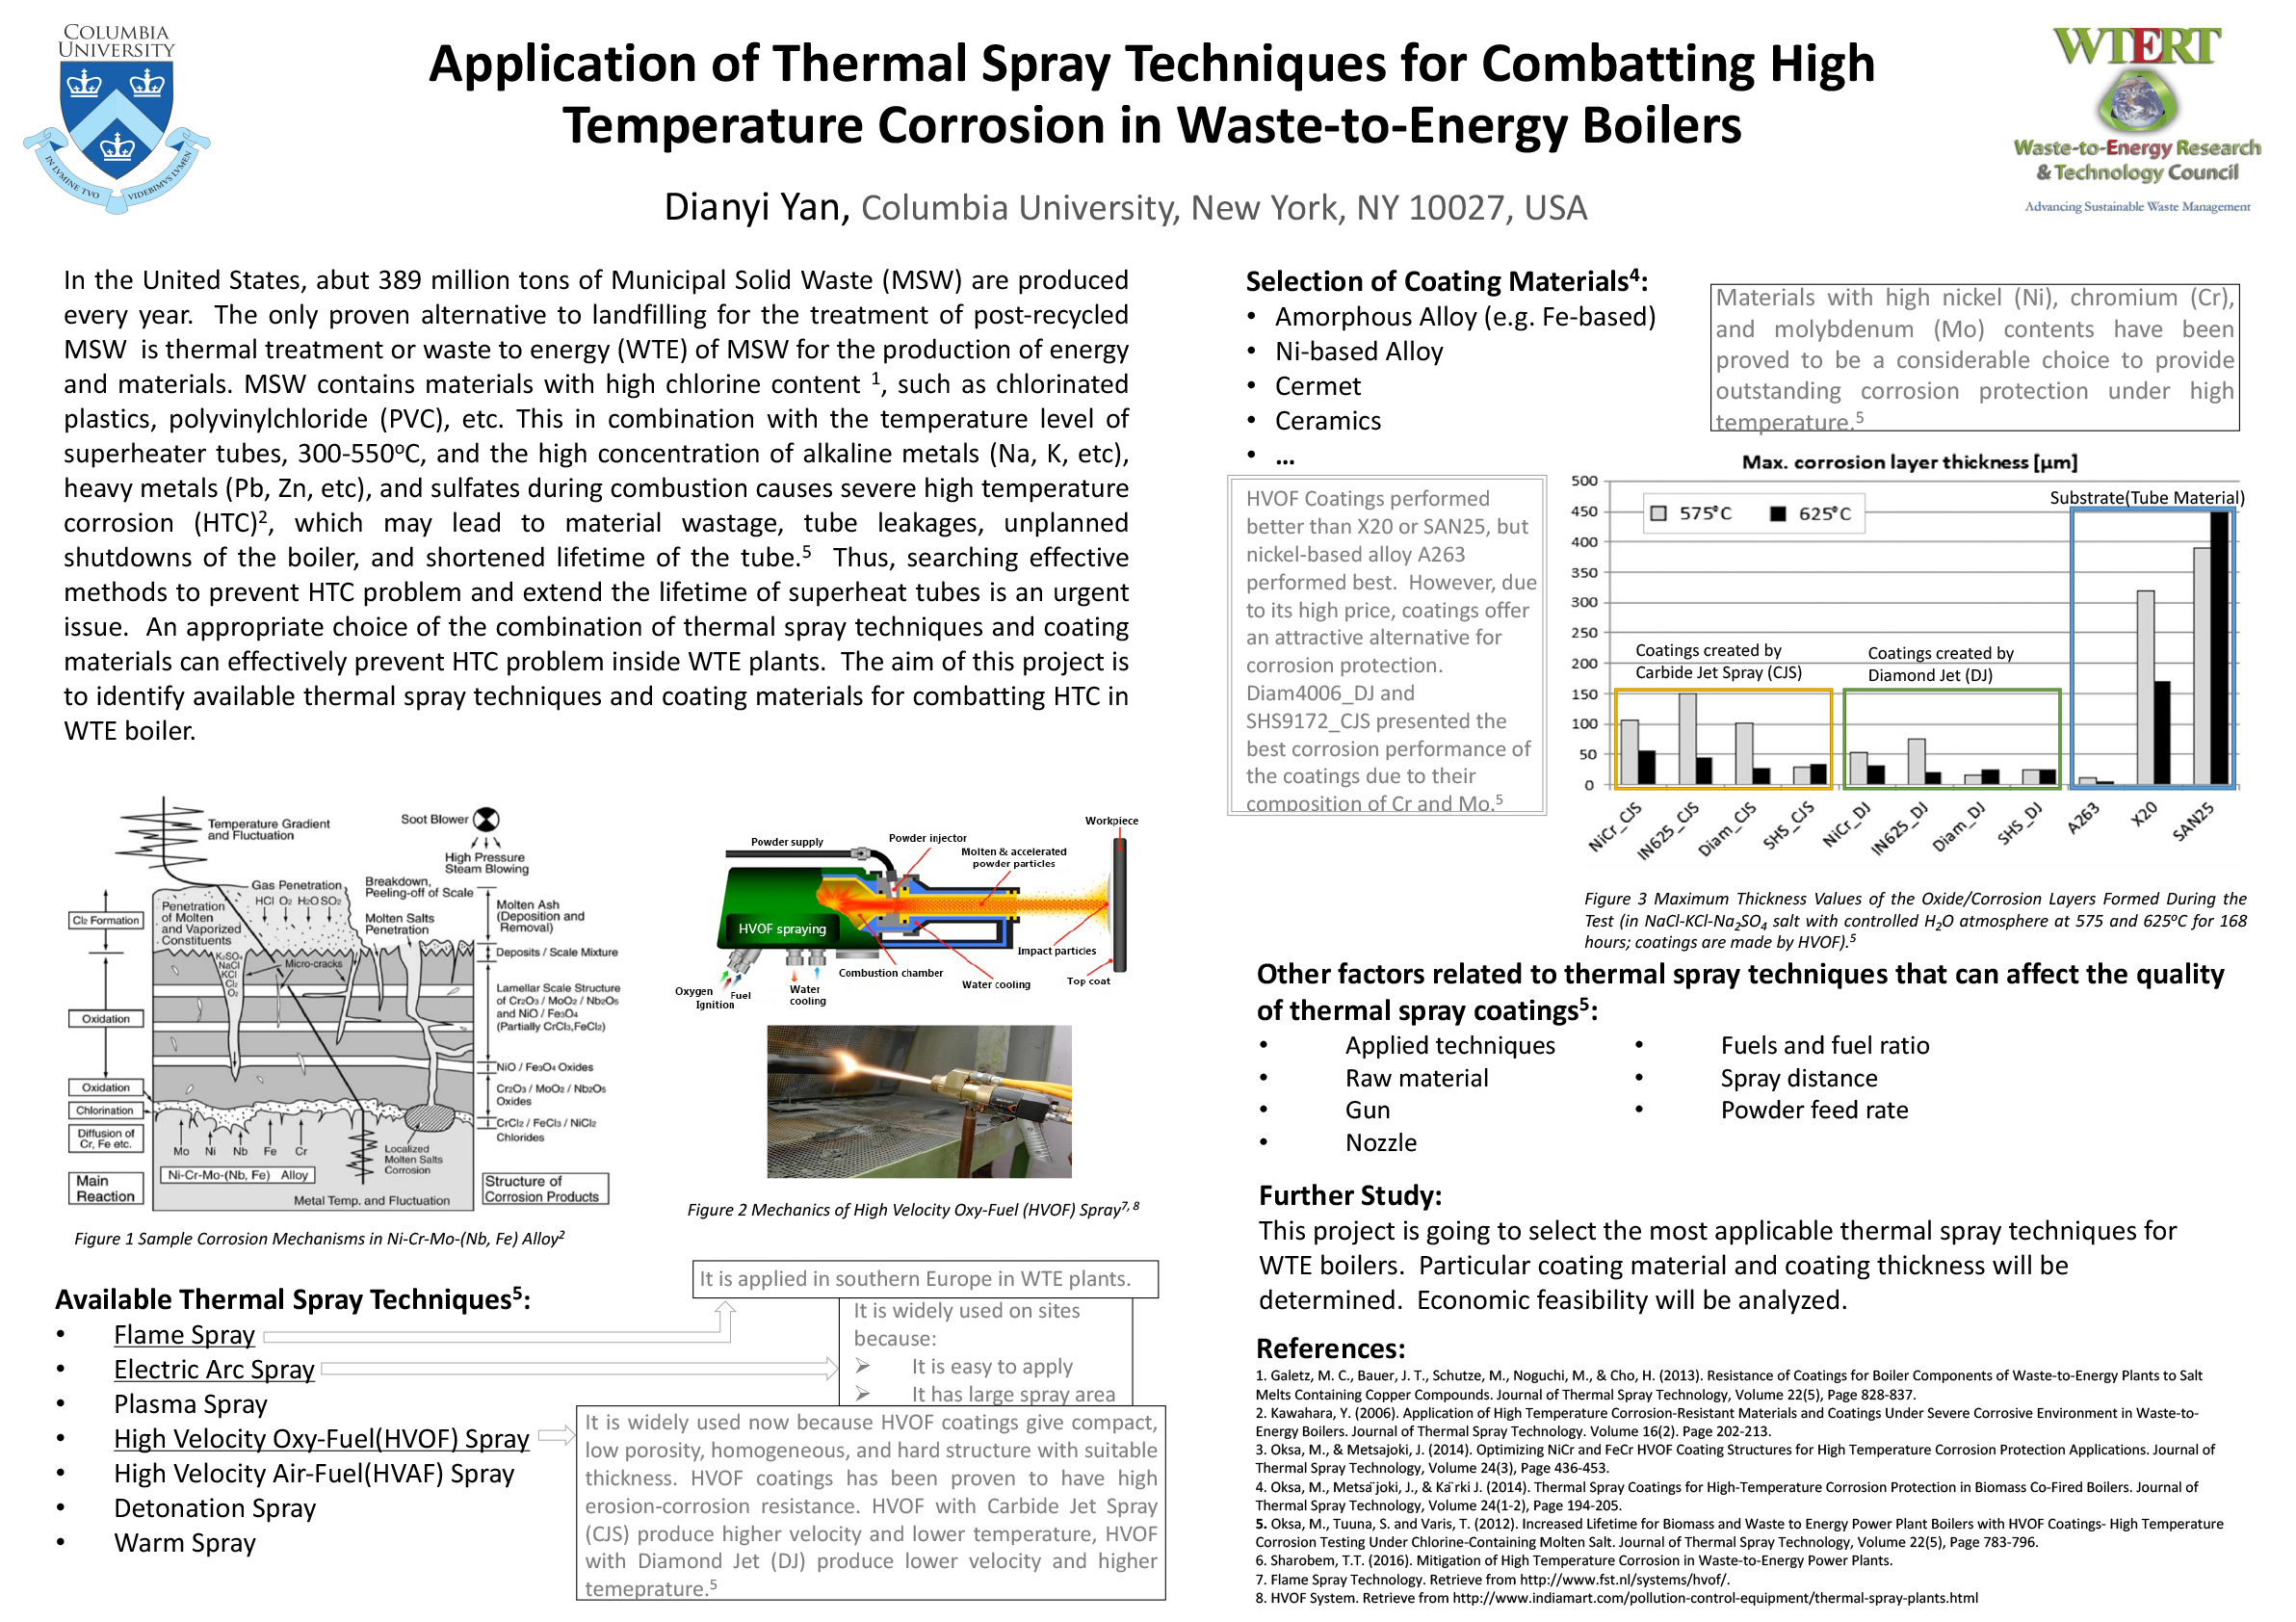 Application of Thermal Spray Techniques for Combatting High Temperature Corrosion in Waste-to-Energy Boilers